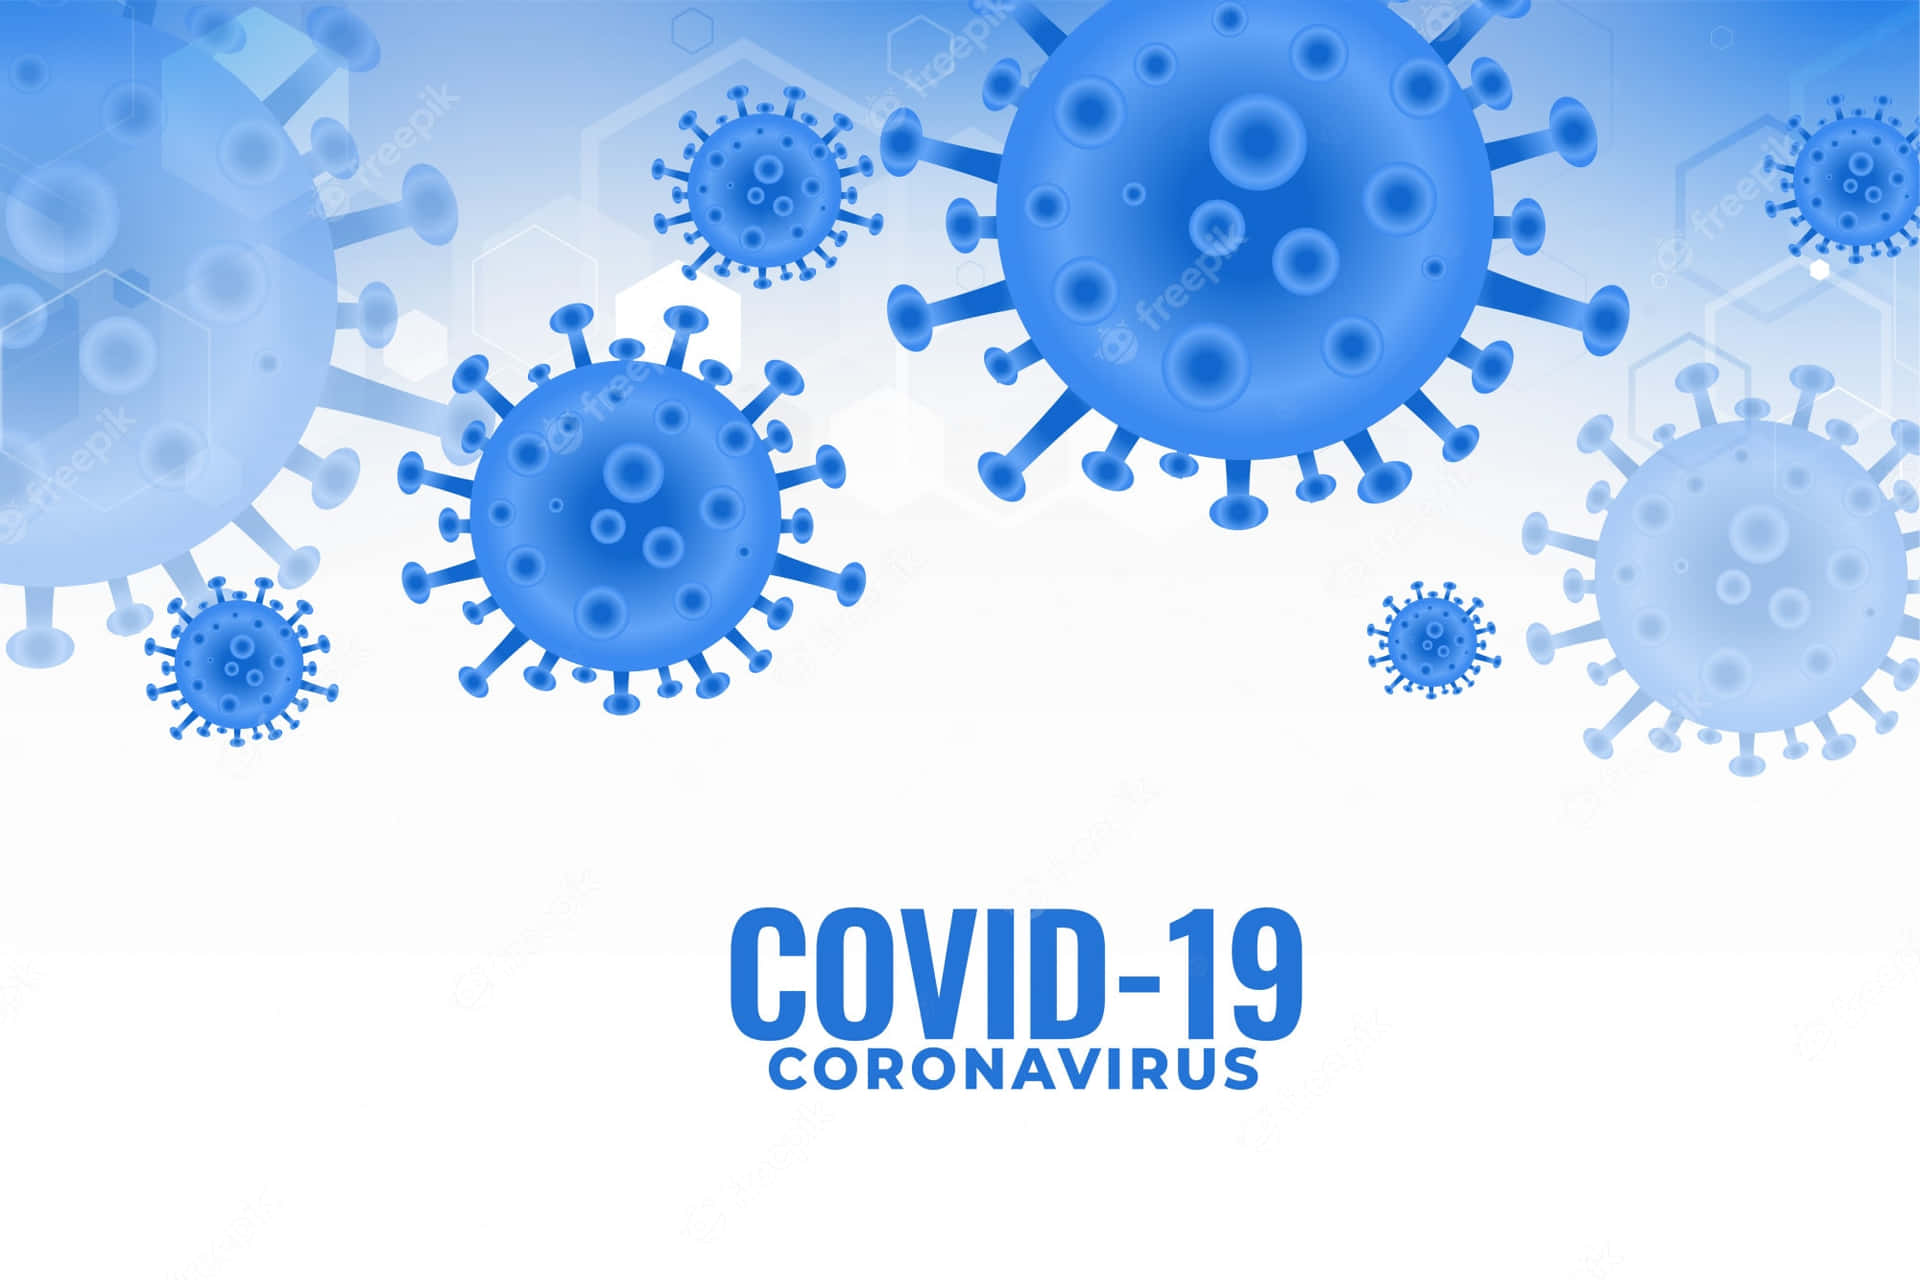 Keep yourself and your family safe with the right information and preventative steps around Coronavirus.